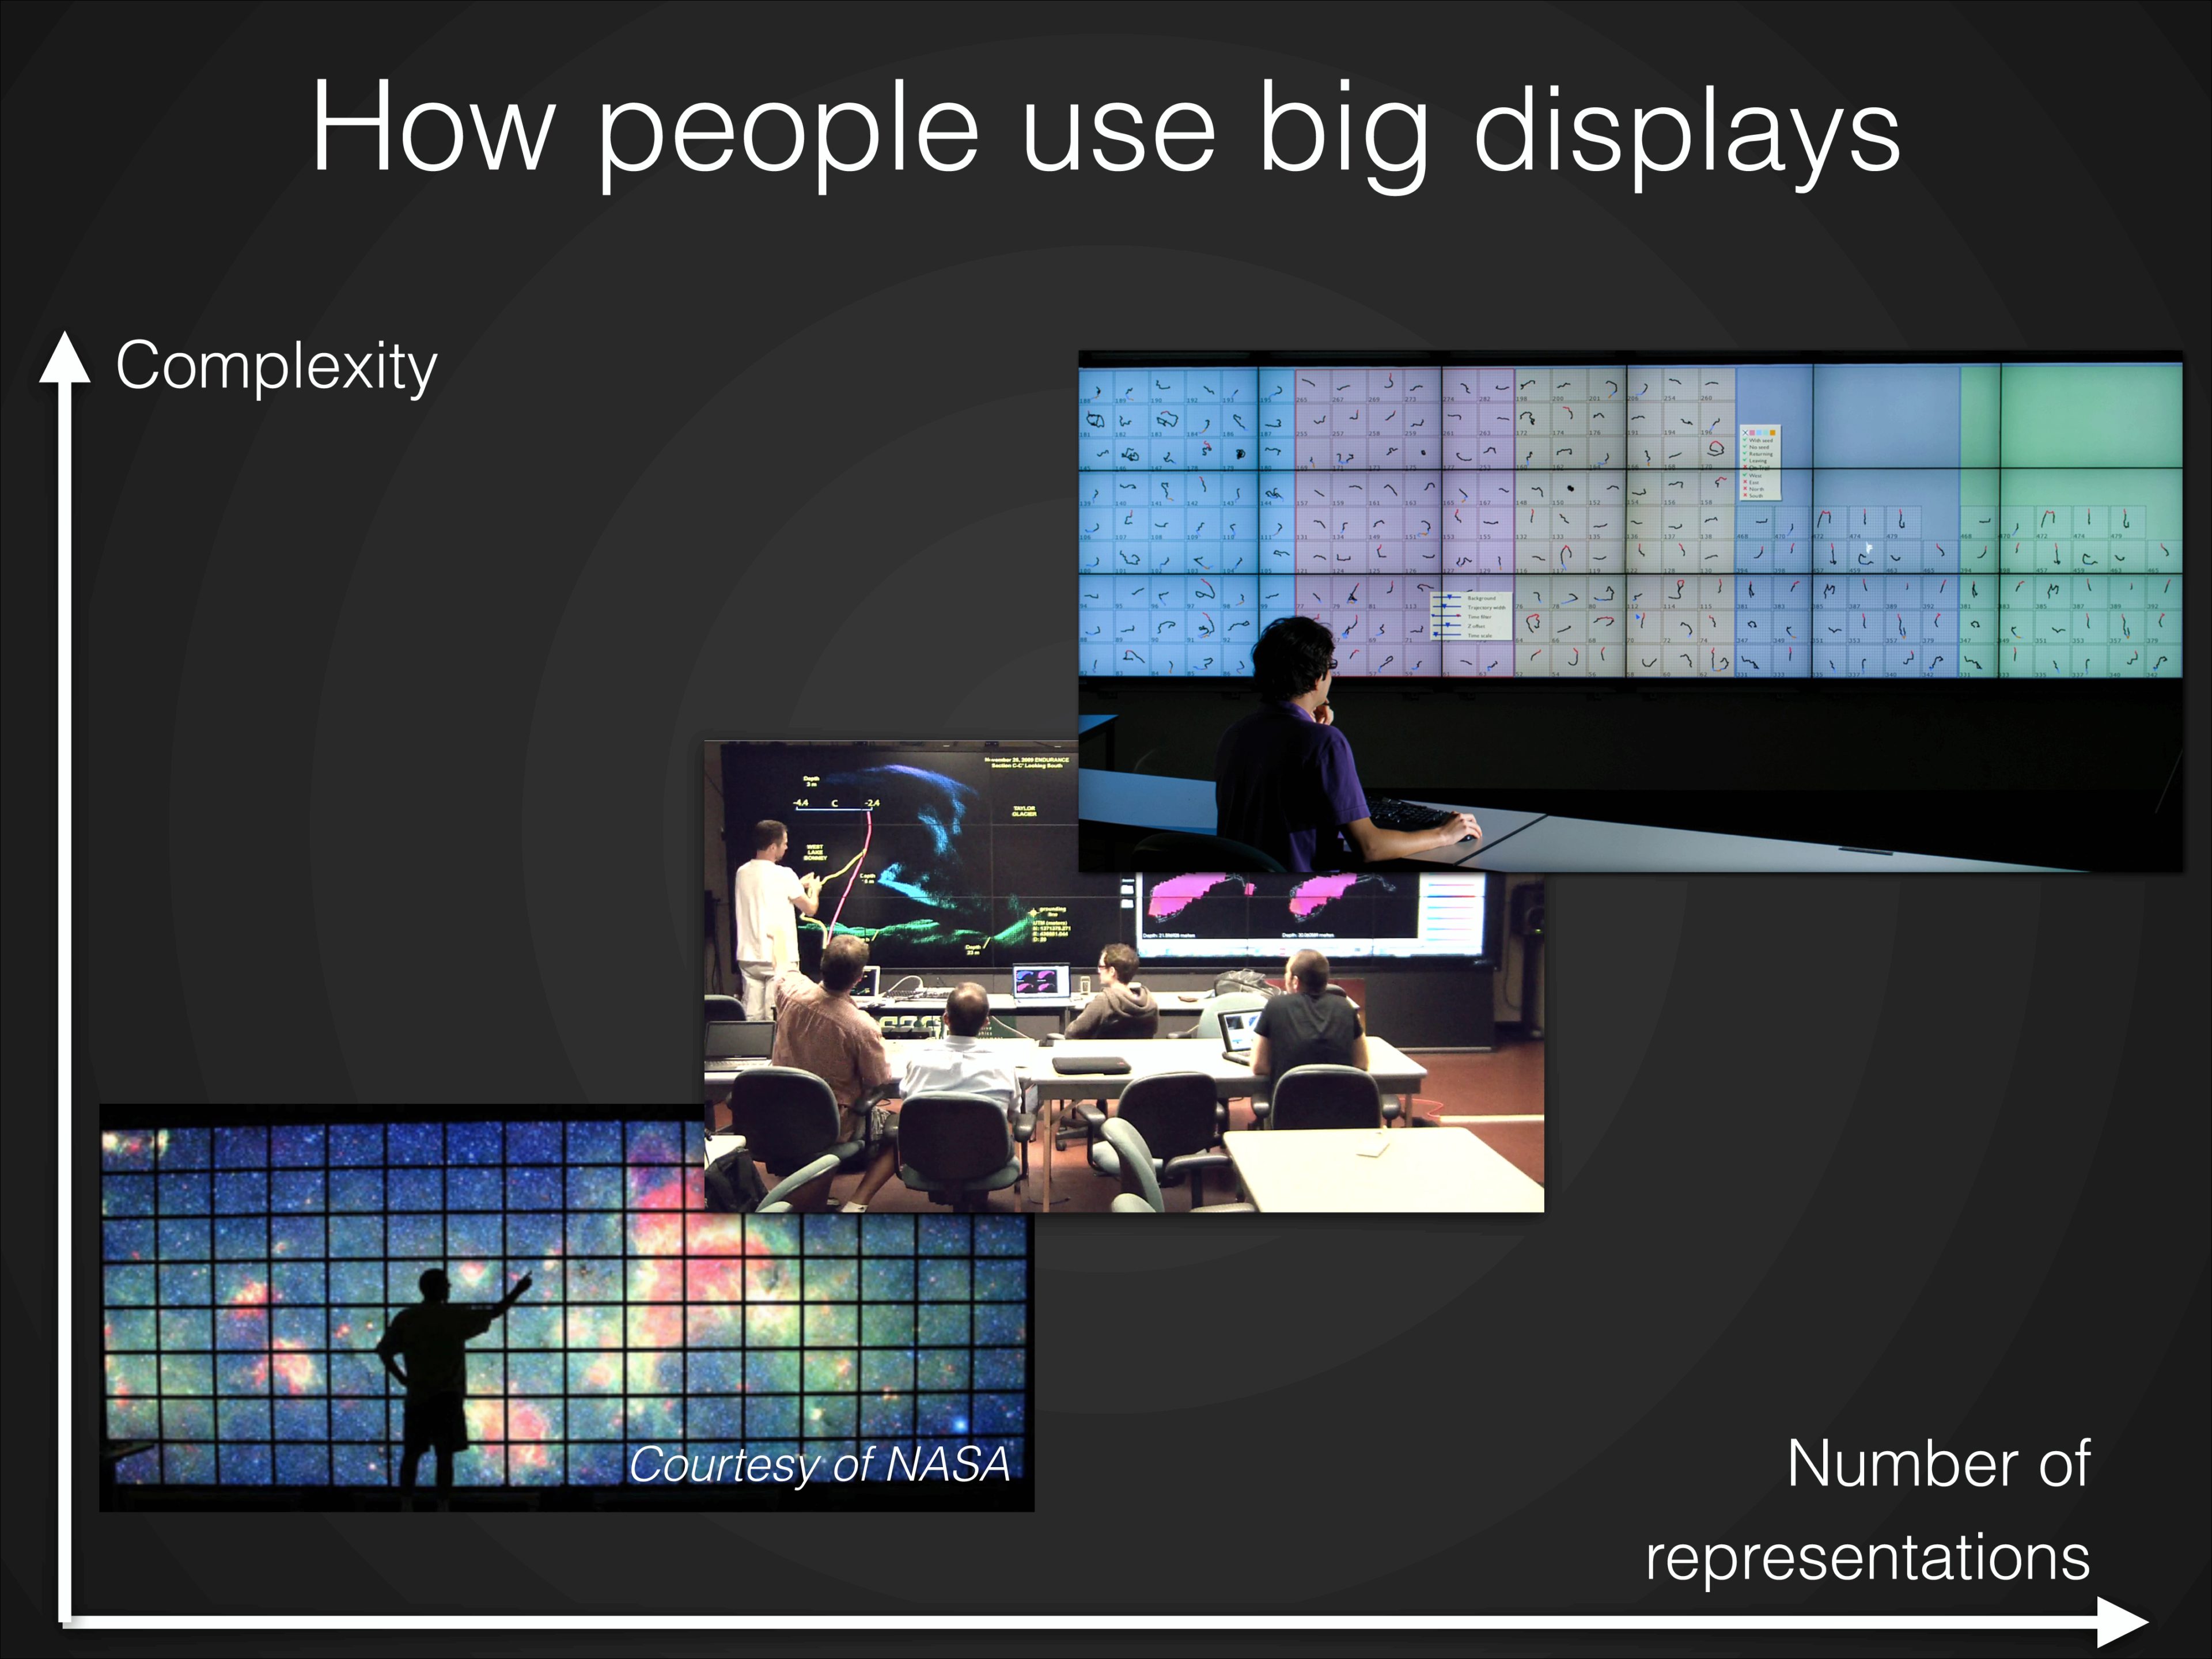 Examples of users in tiled display environments.